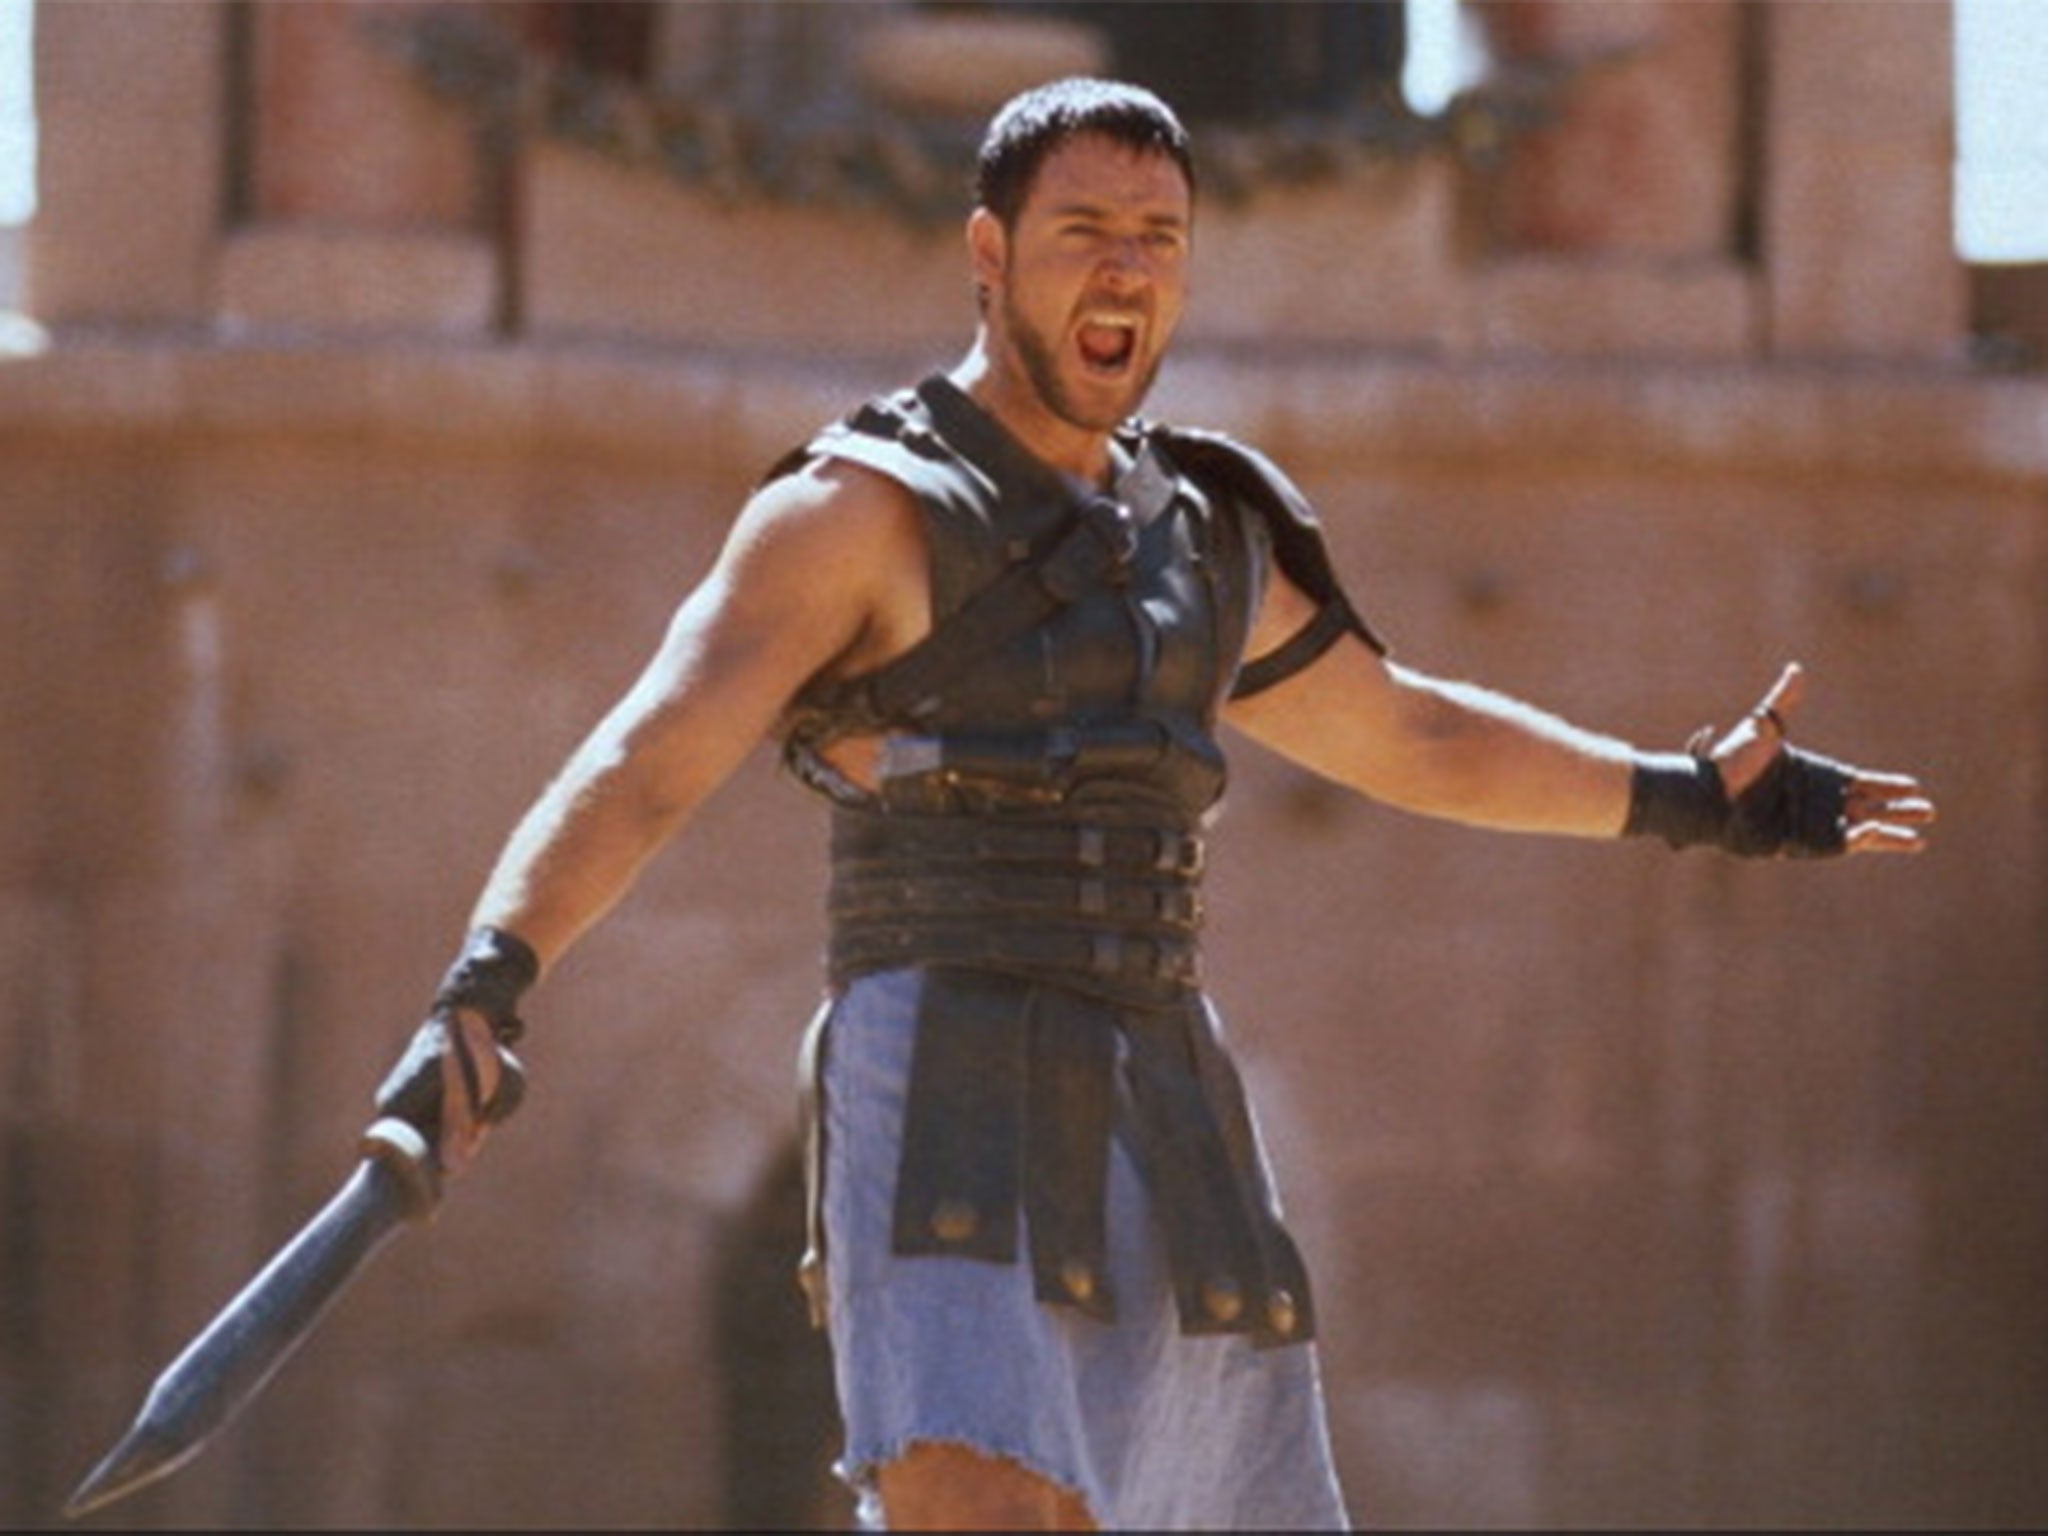 Russell Crowe, star of Gladiator, has expressed an interest in buying Leeds